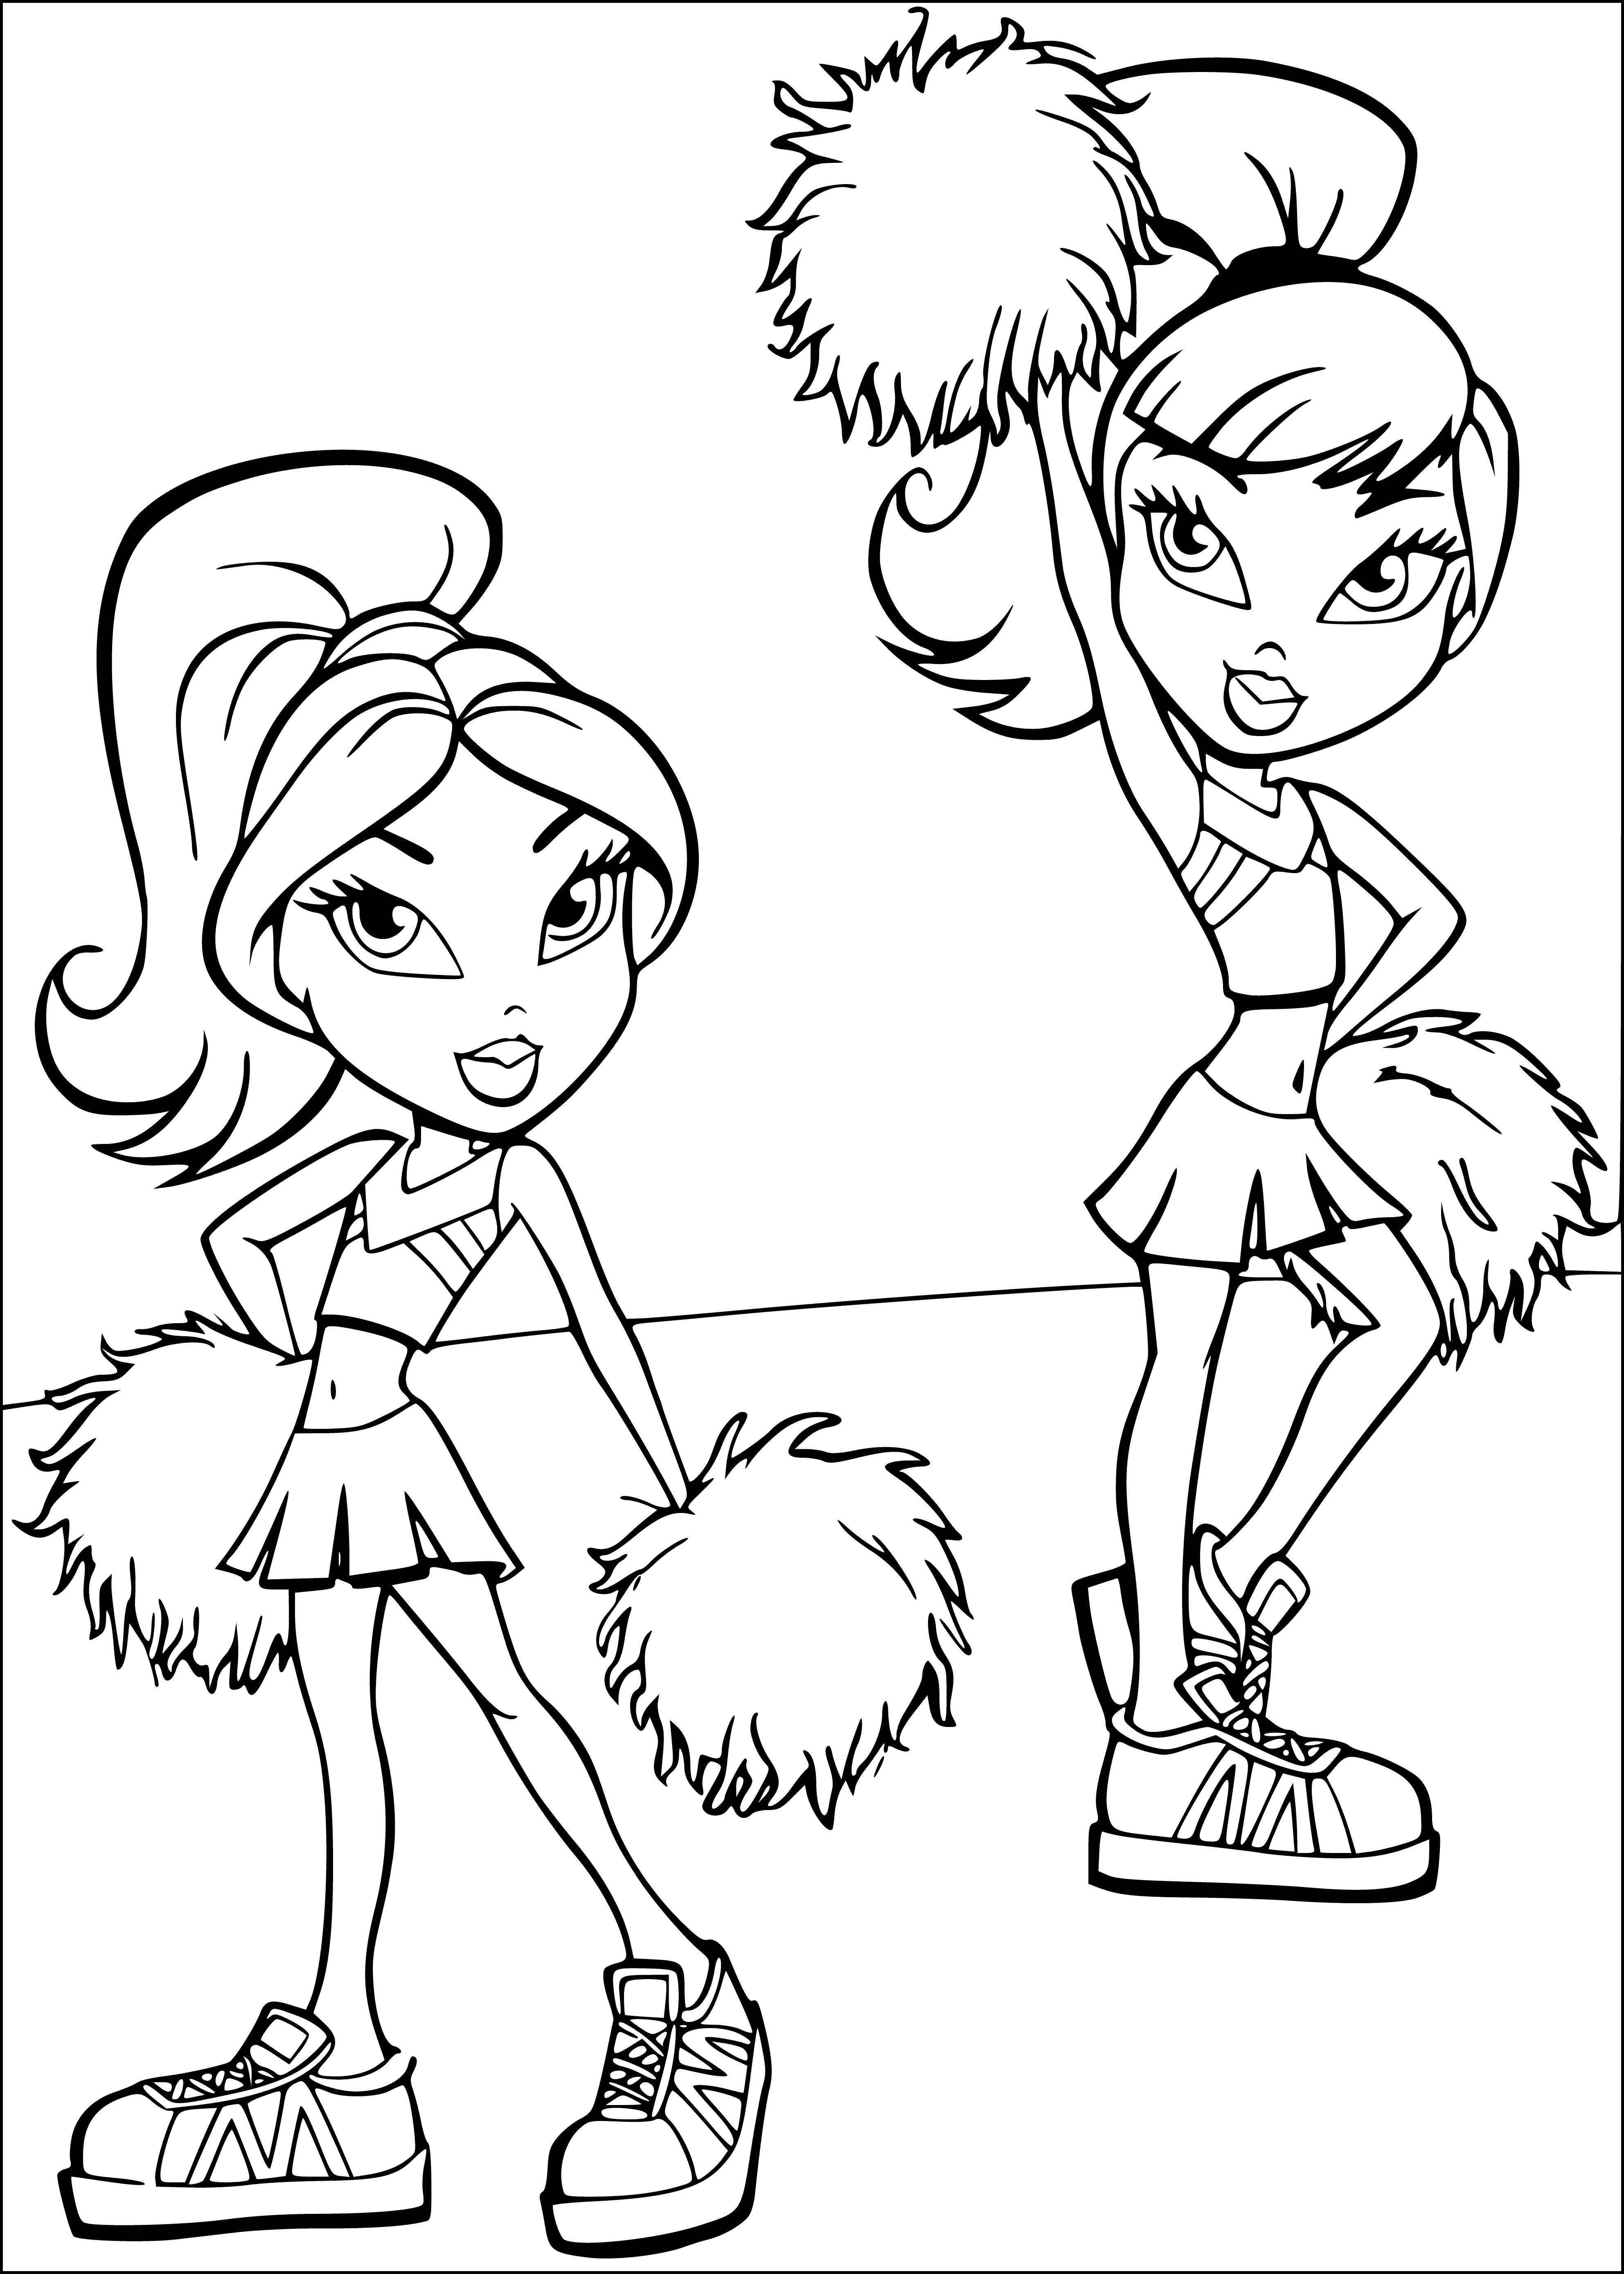 Support Group coloring page